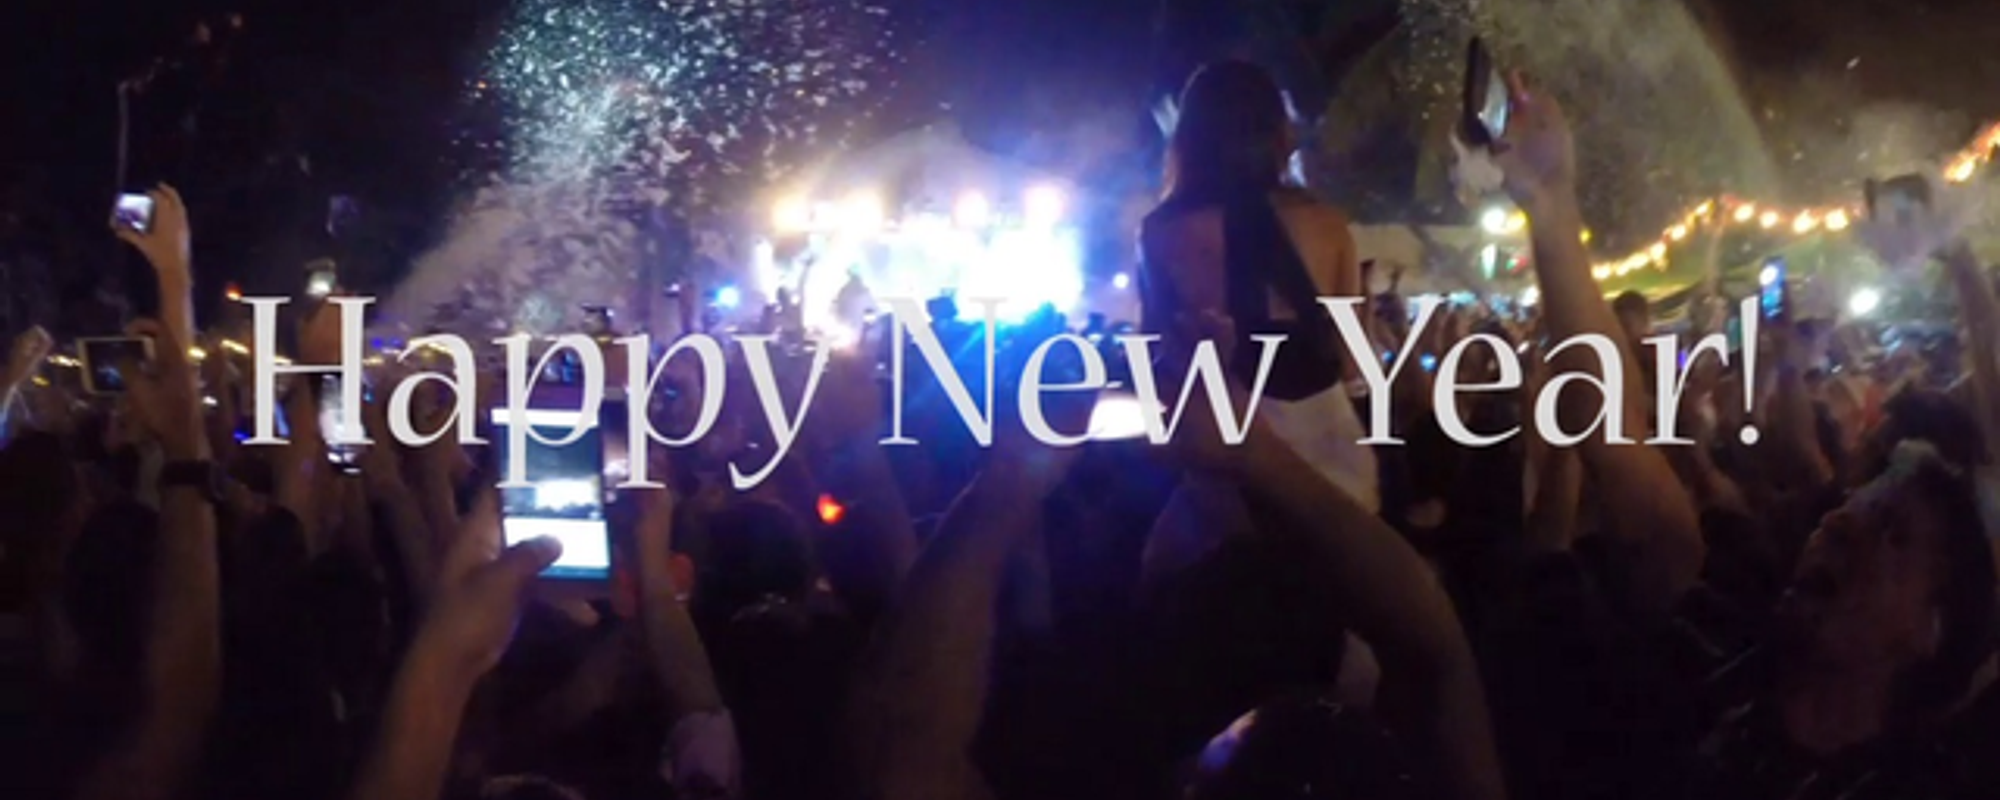 DTube - A STEEMy New Year's Eve in Phuket, Thailand w/ @martibis & @lizanomadsoul